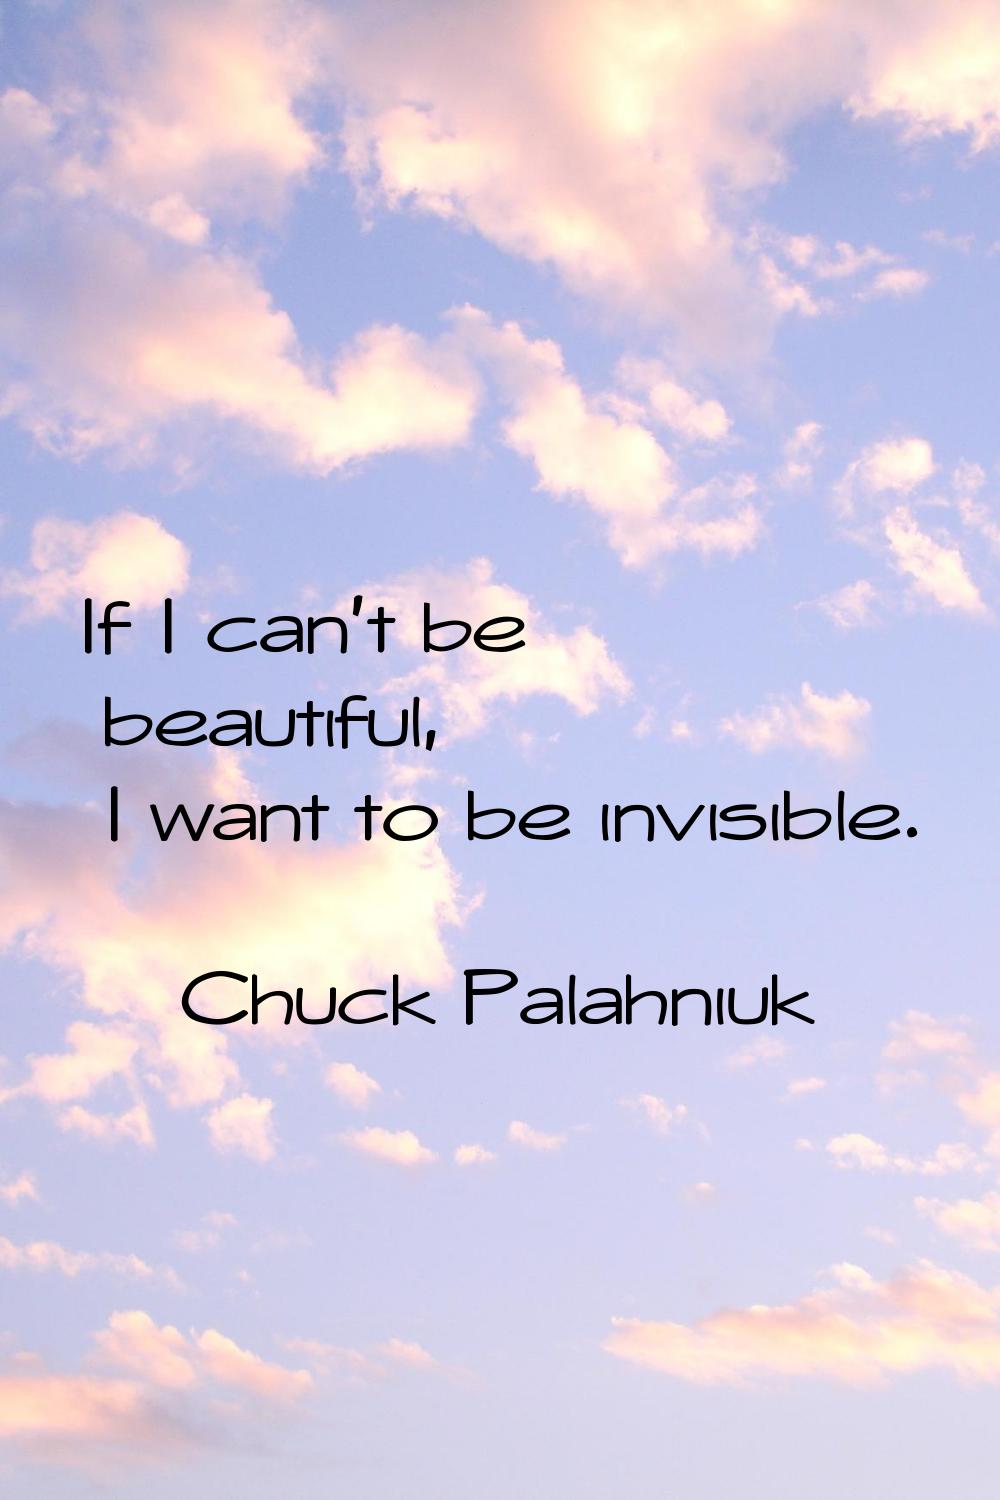 If I can't be beautiful, I want to be invisible.